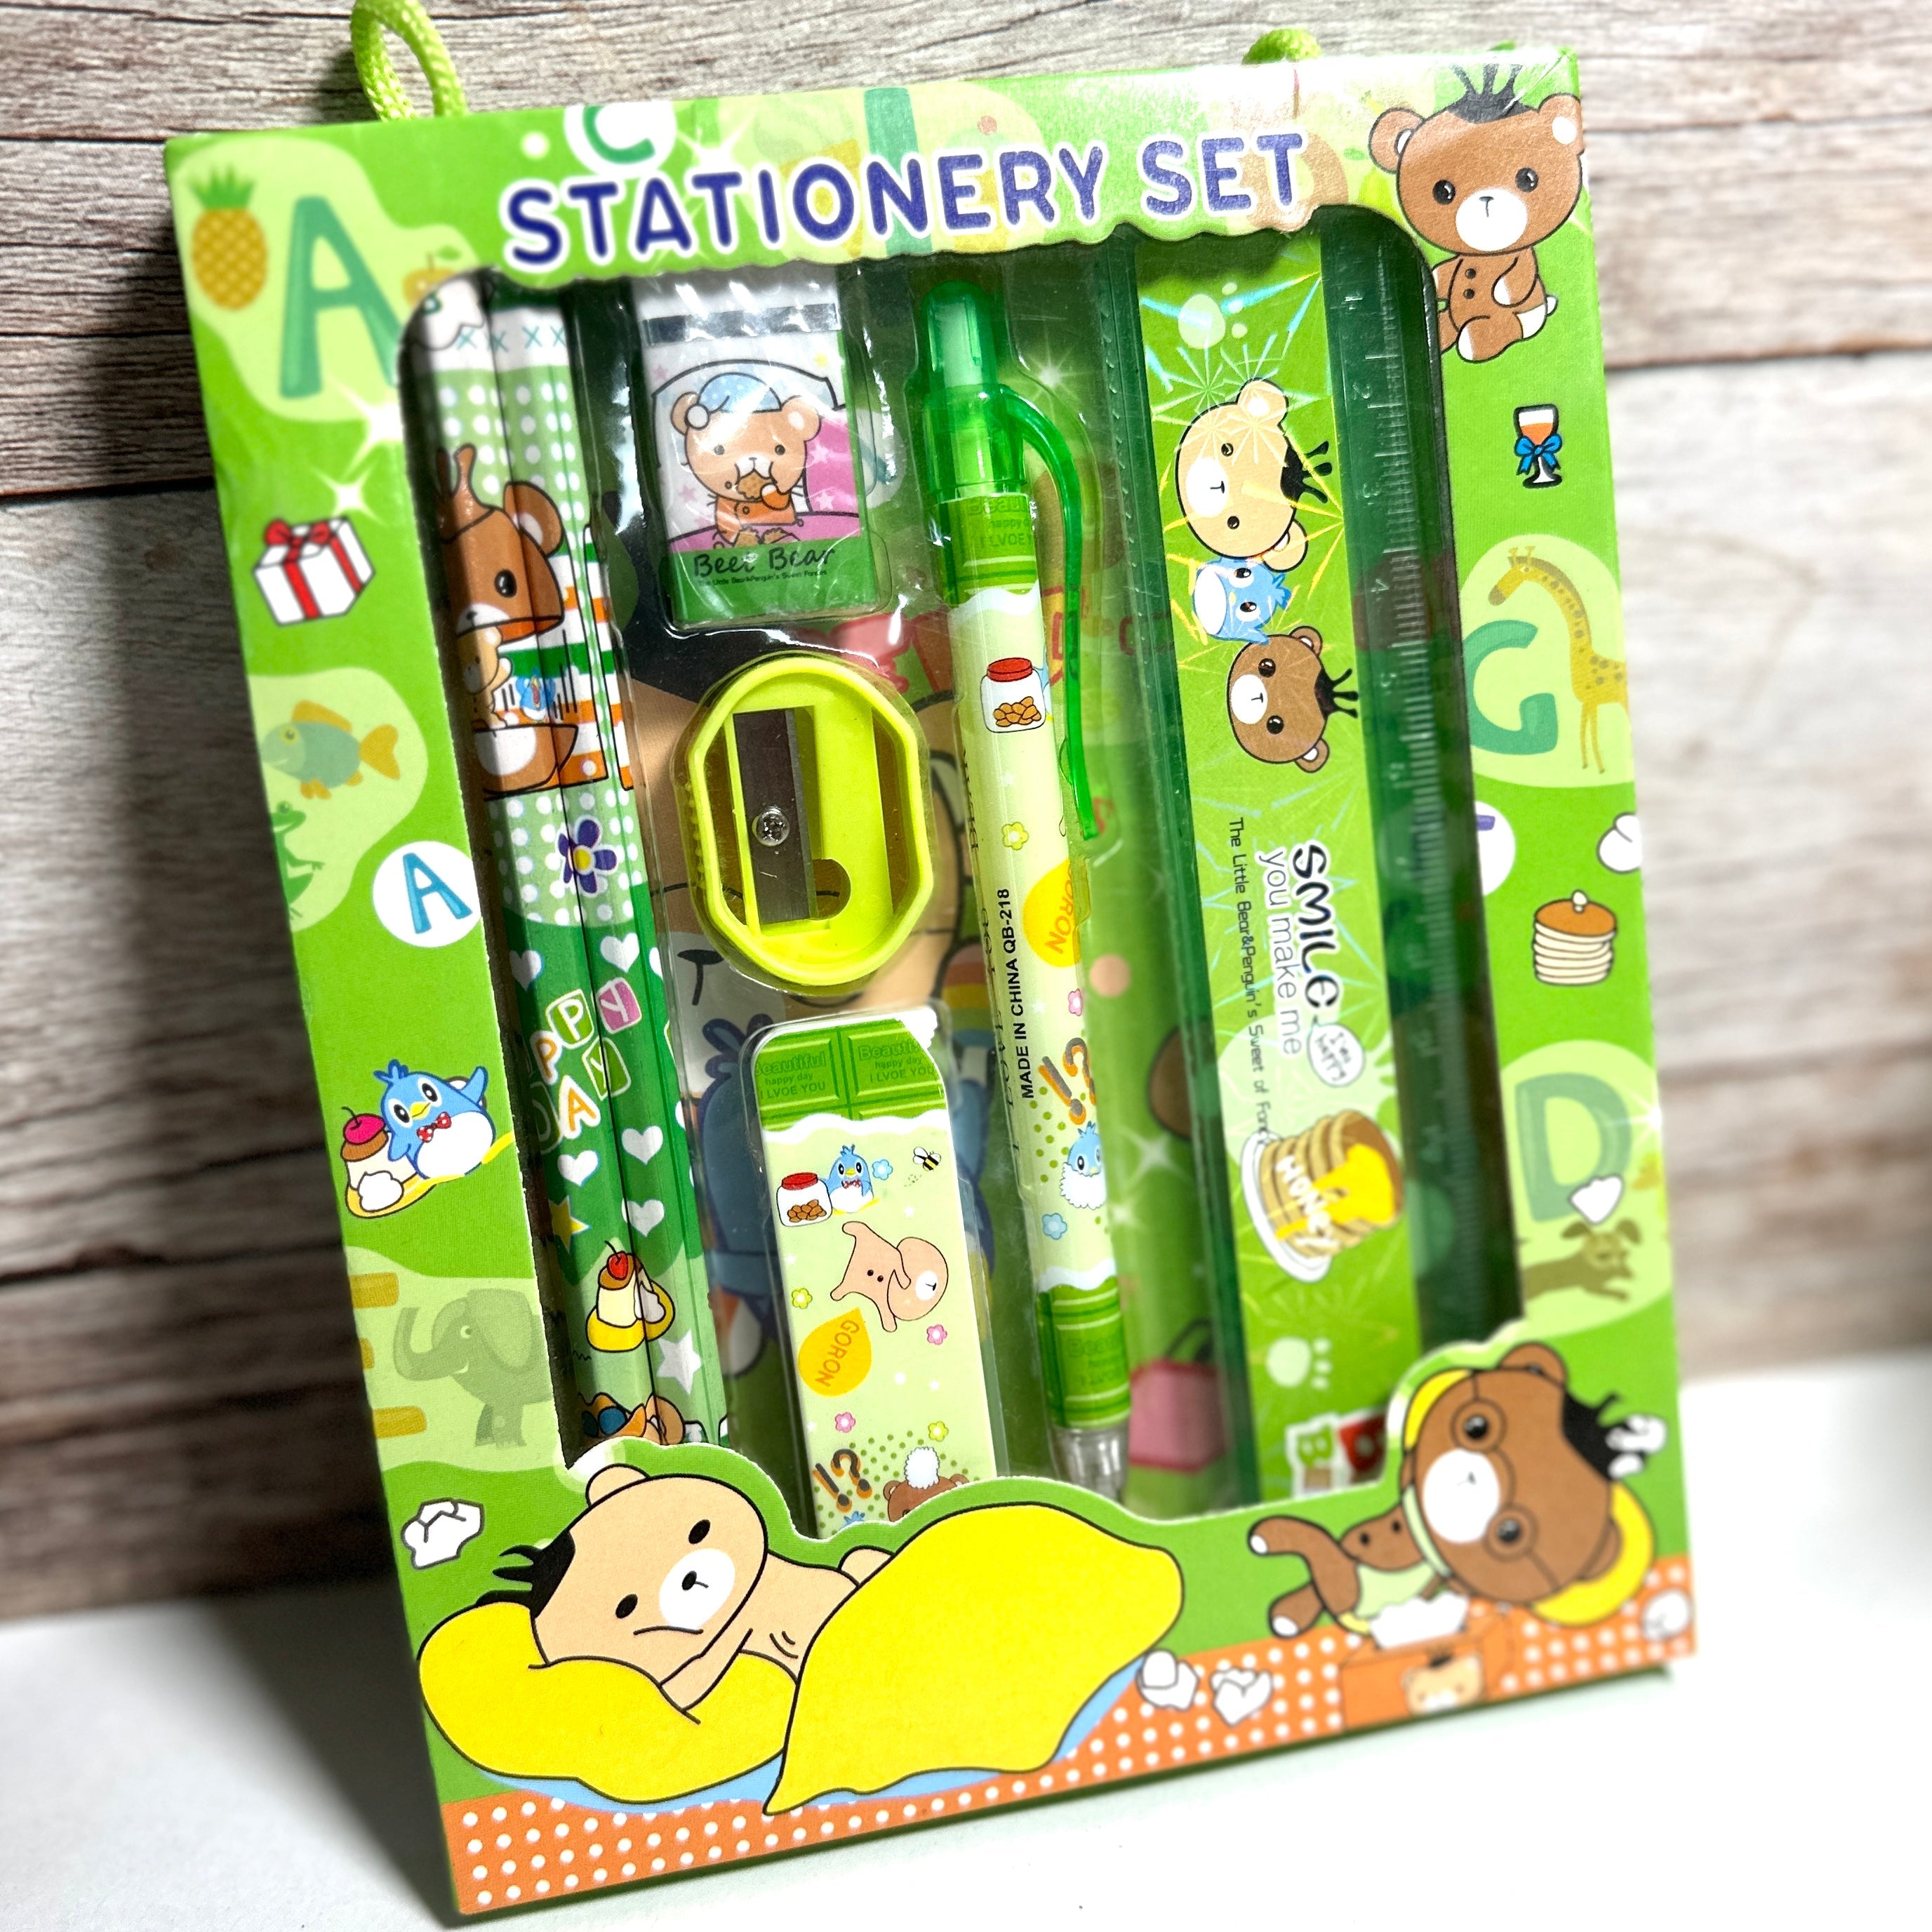 Festive Stationery Gift Set - The Giving Tree